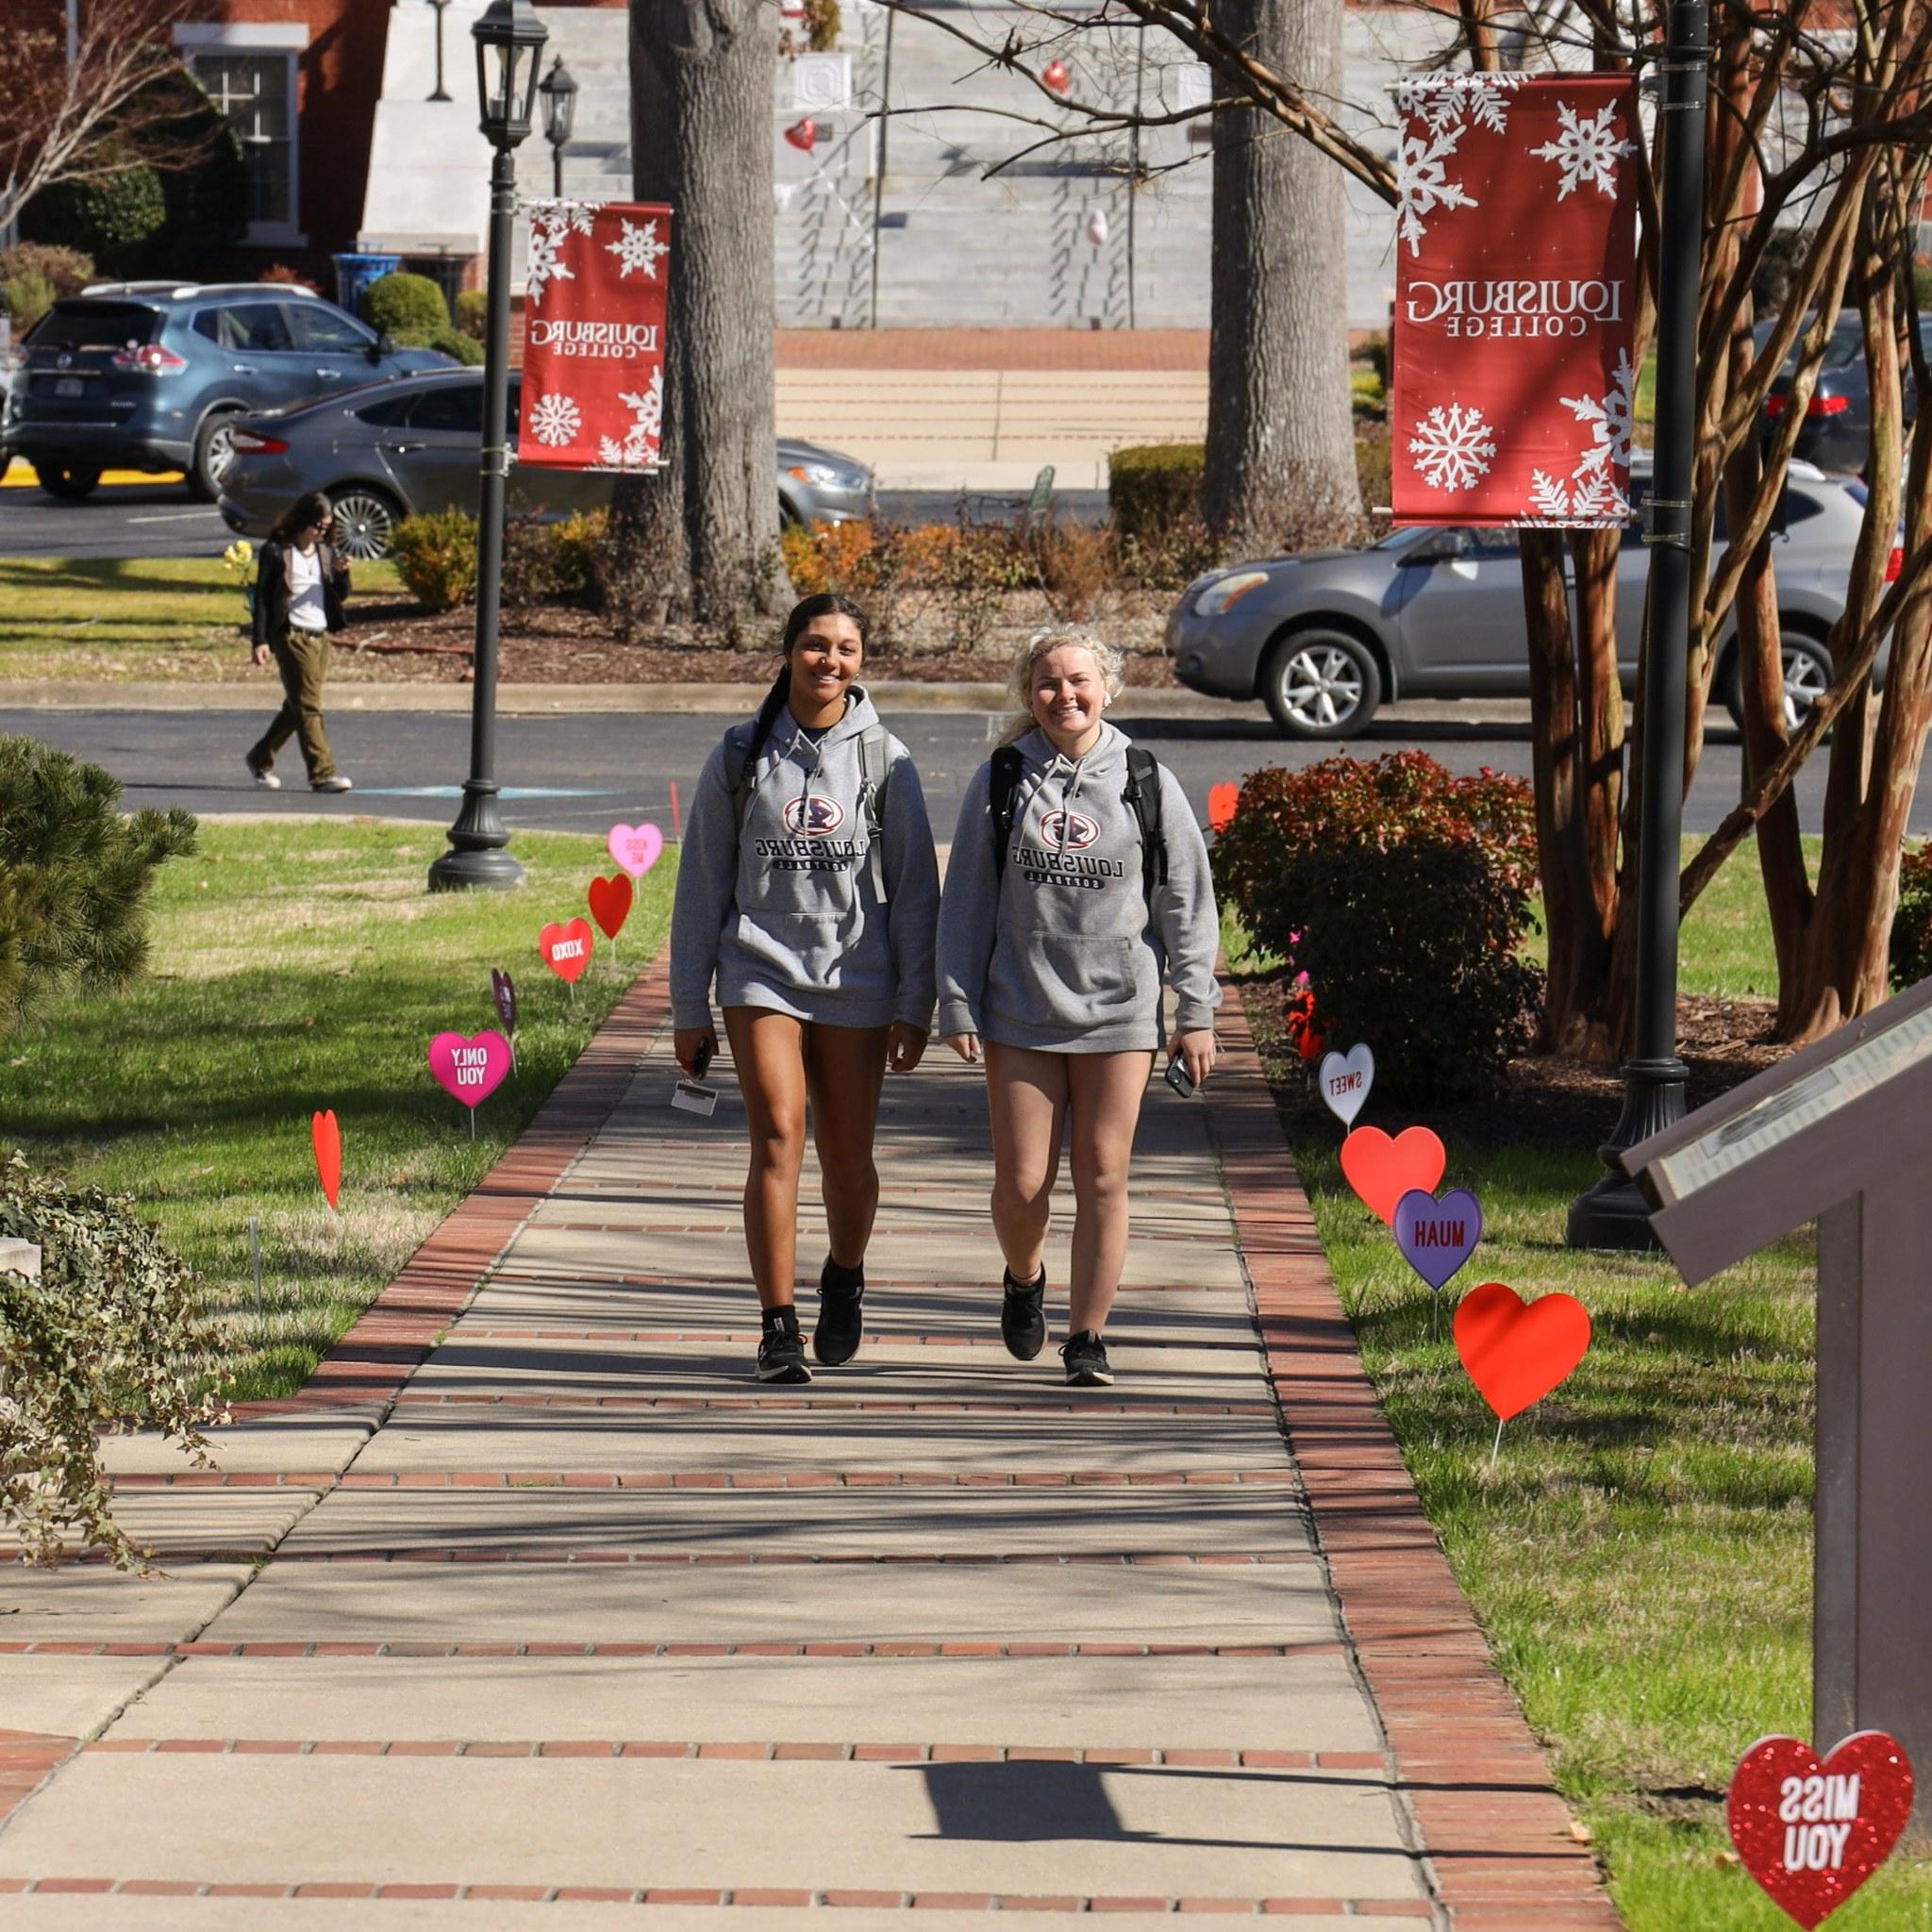 Two femaile students walking on campus.